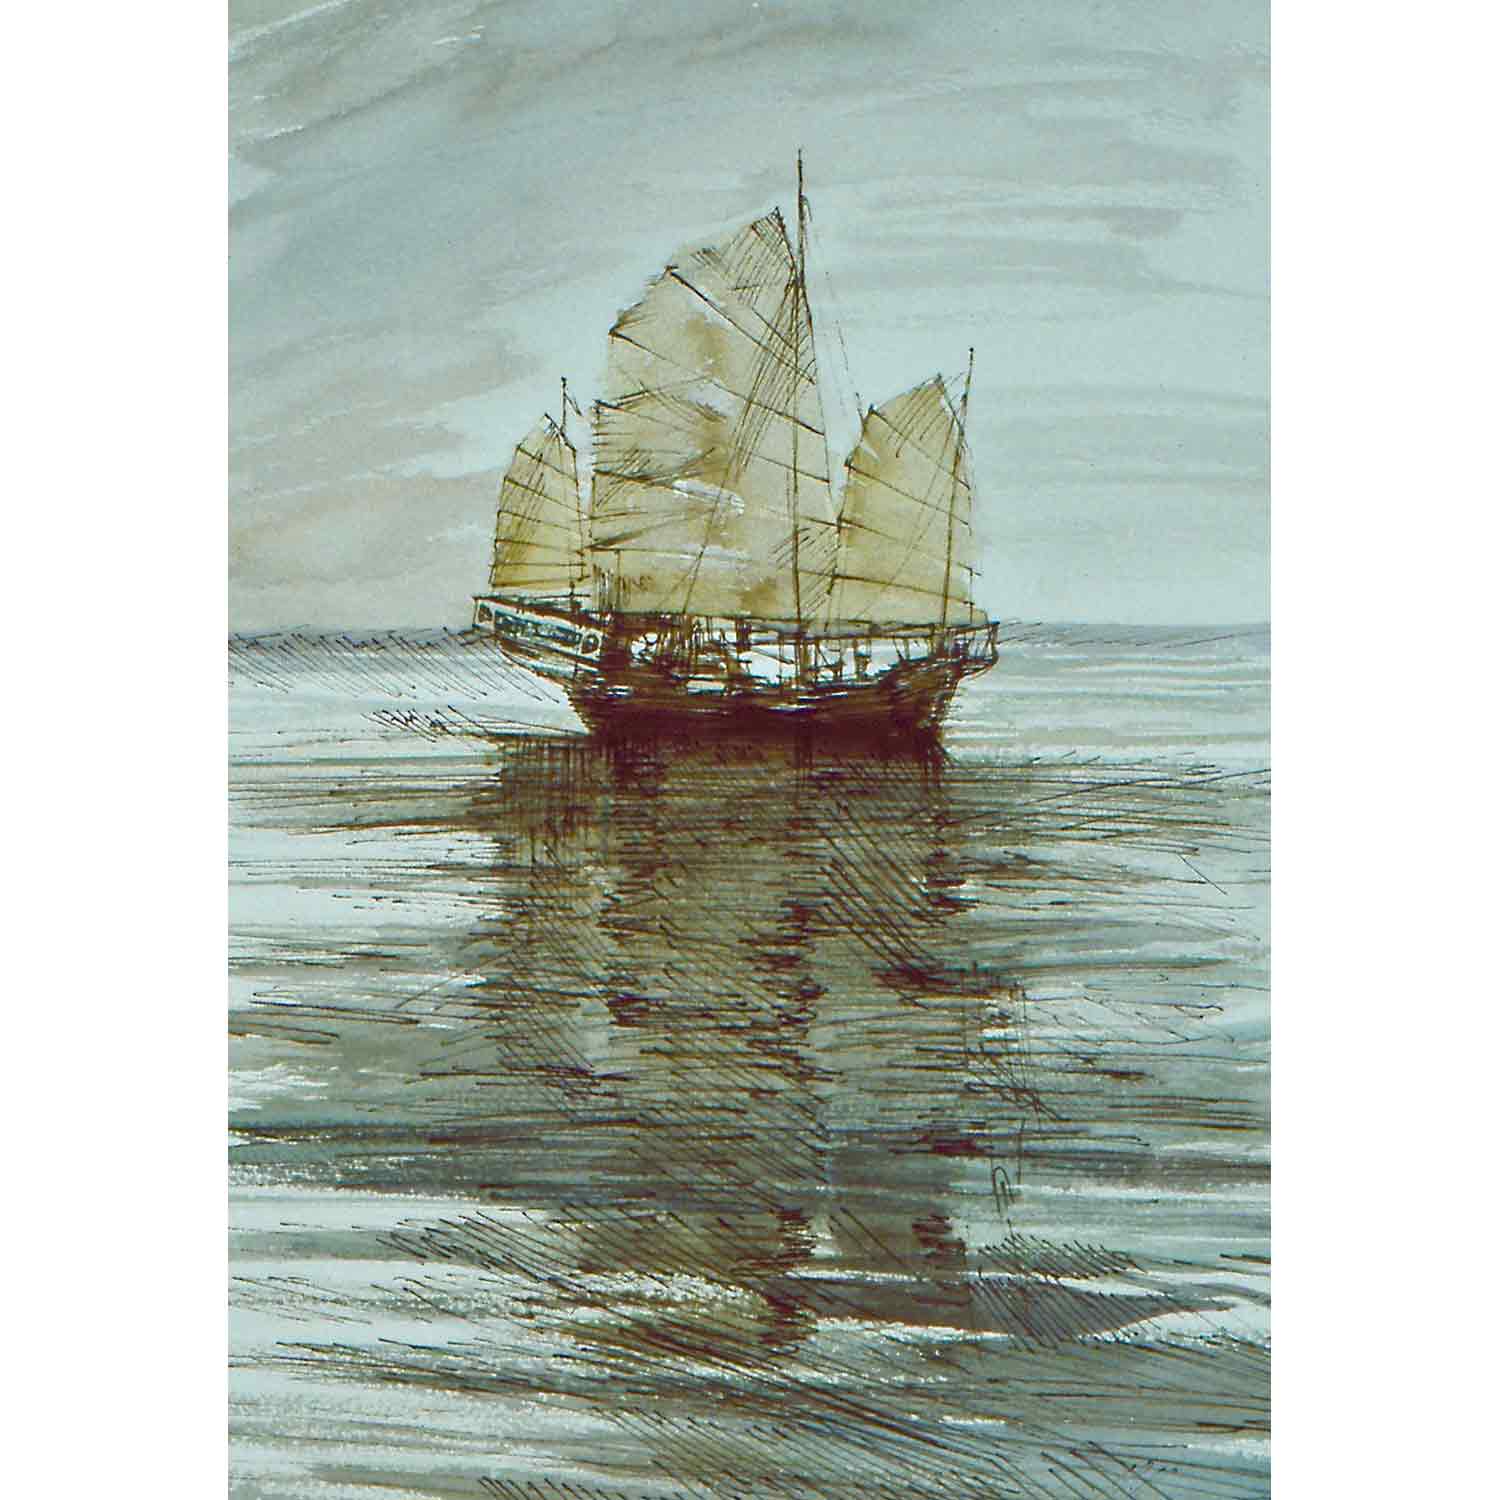 Chinese Junk - pen and watercolour